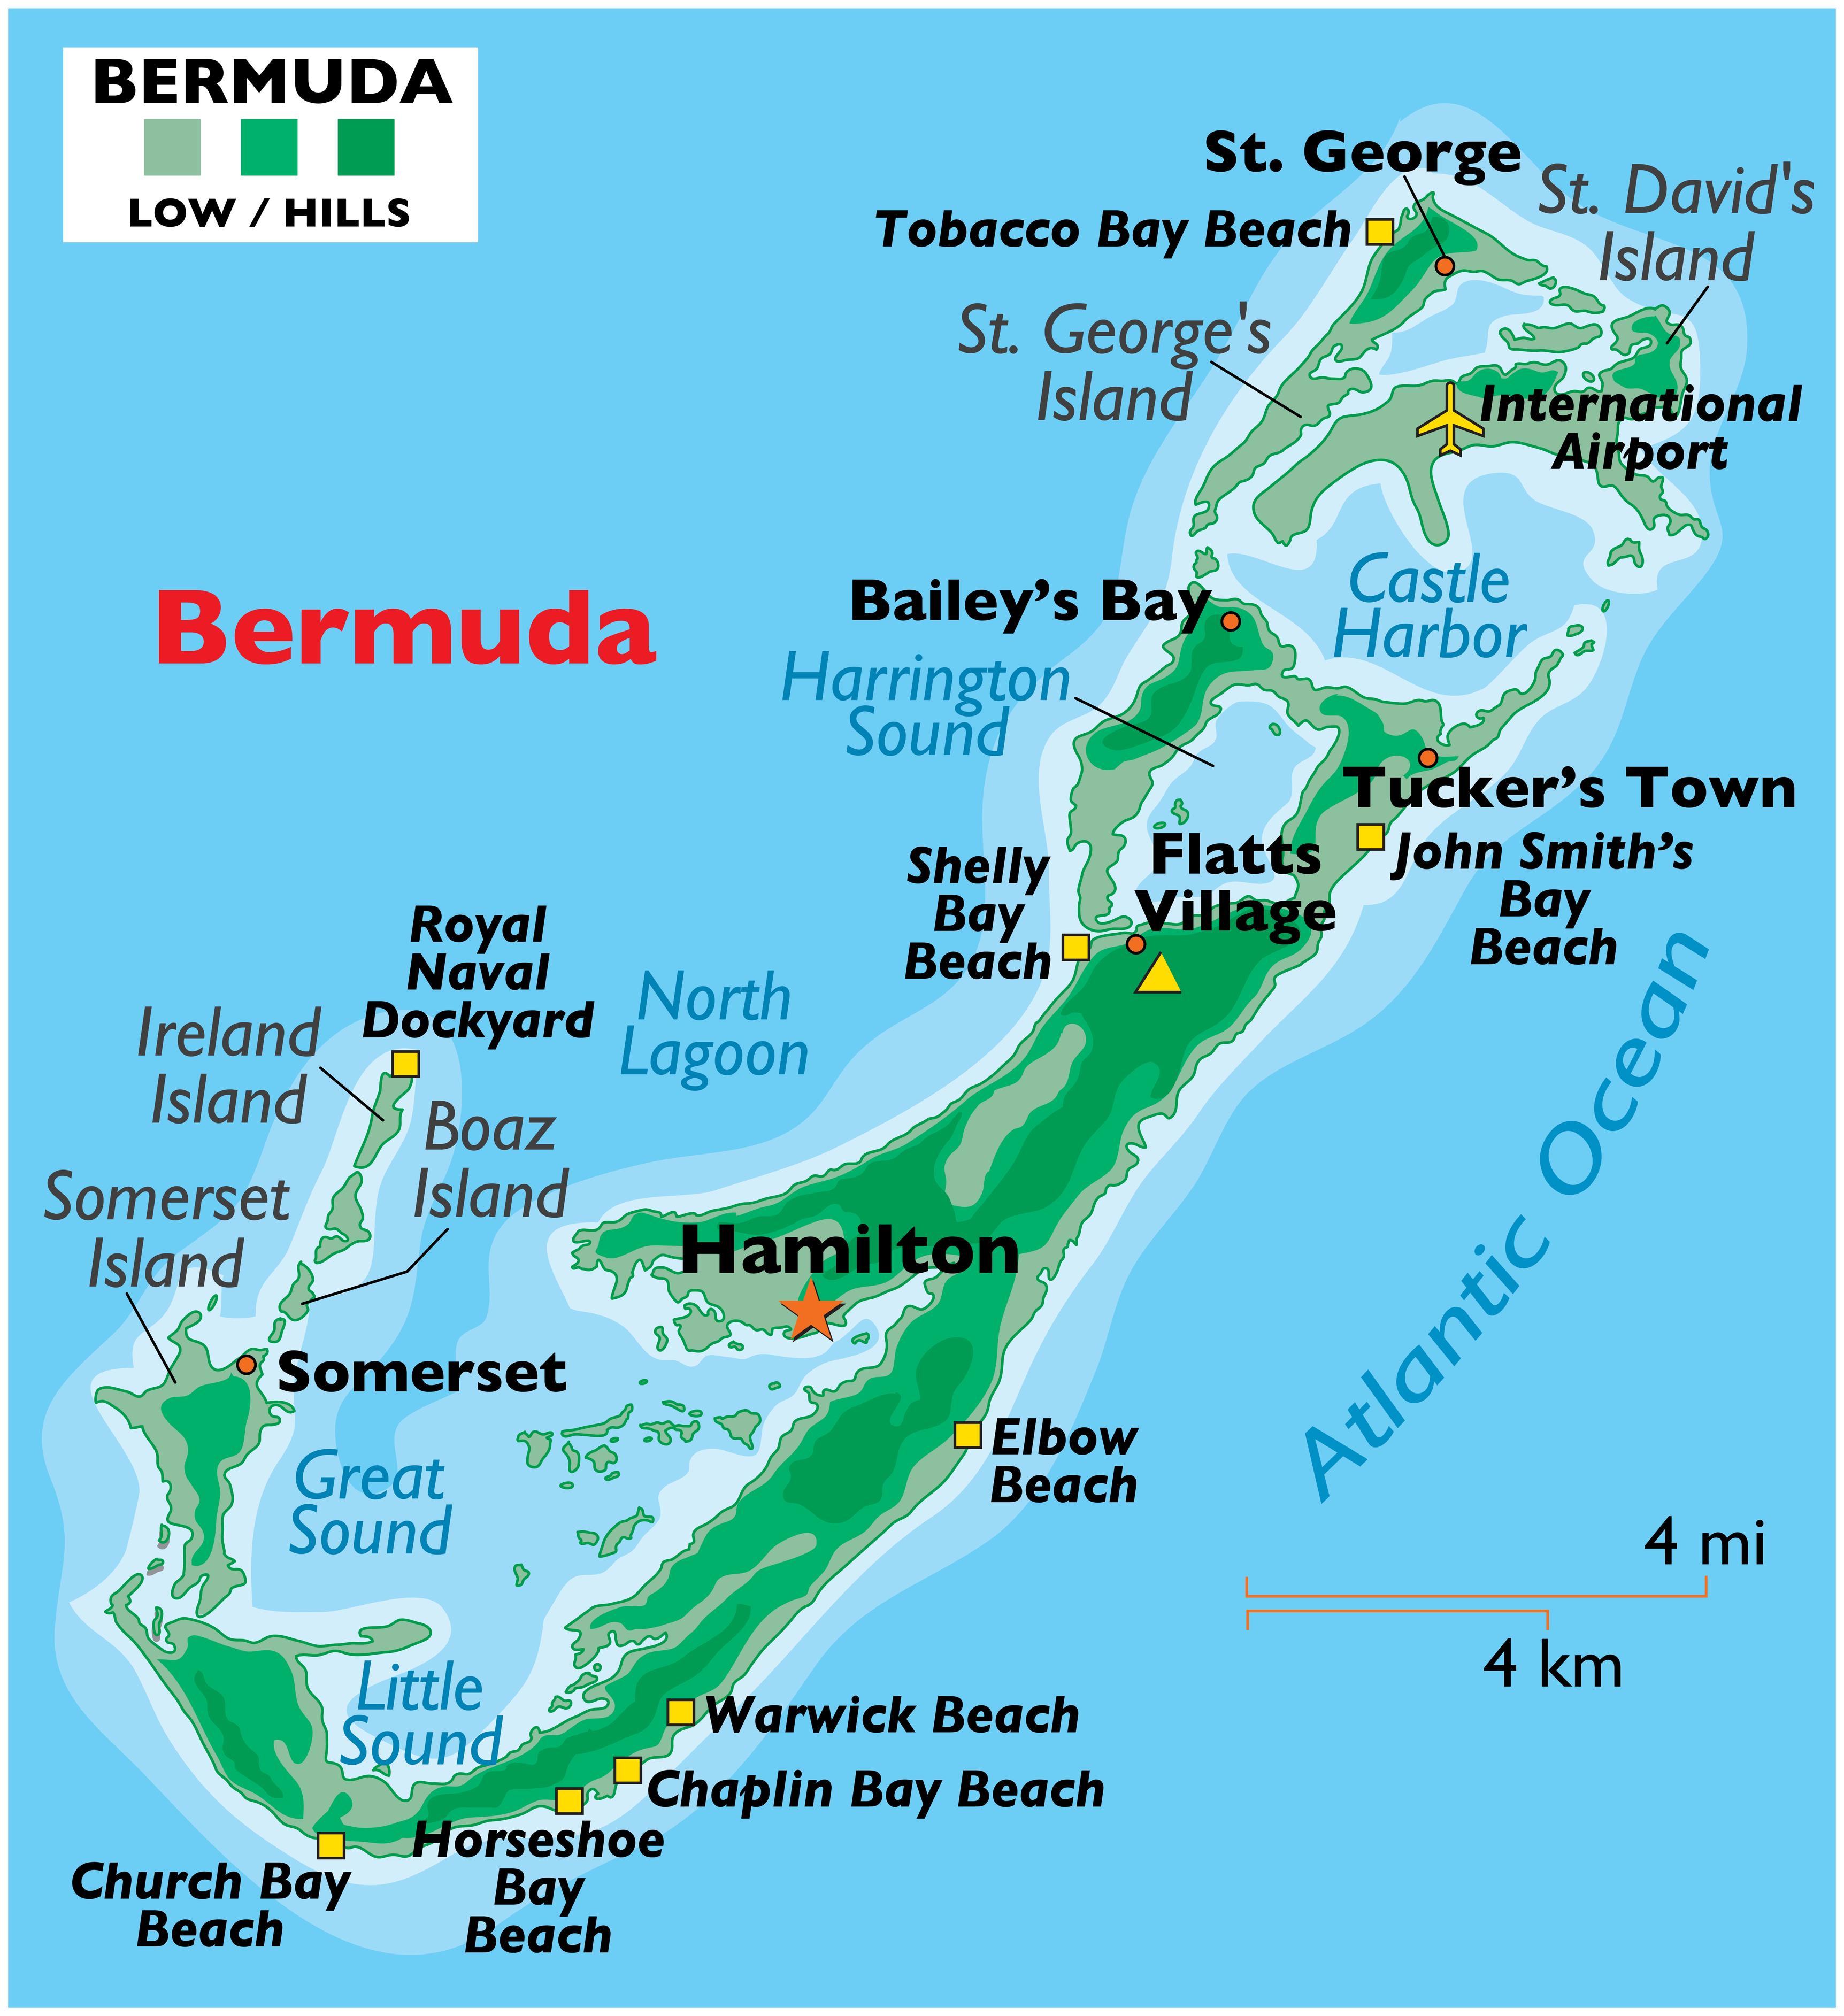 Physical Map of Bermuda showing islands, beaches, surrounding water features, highest point, important settlements, and more.